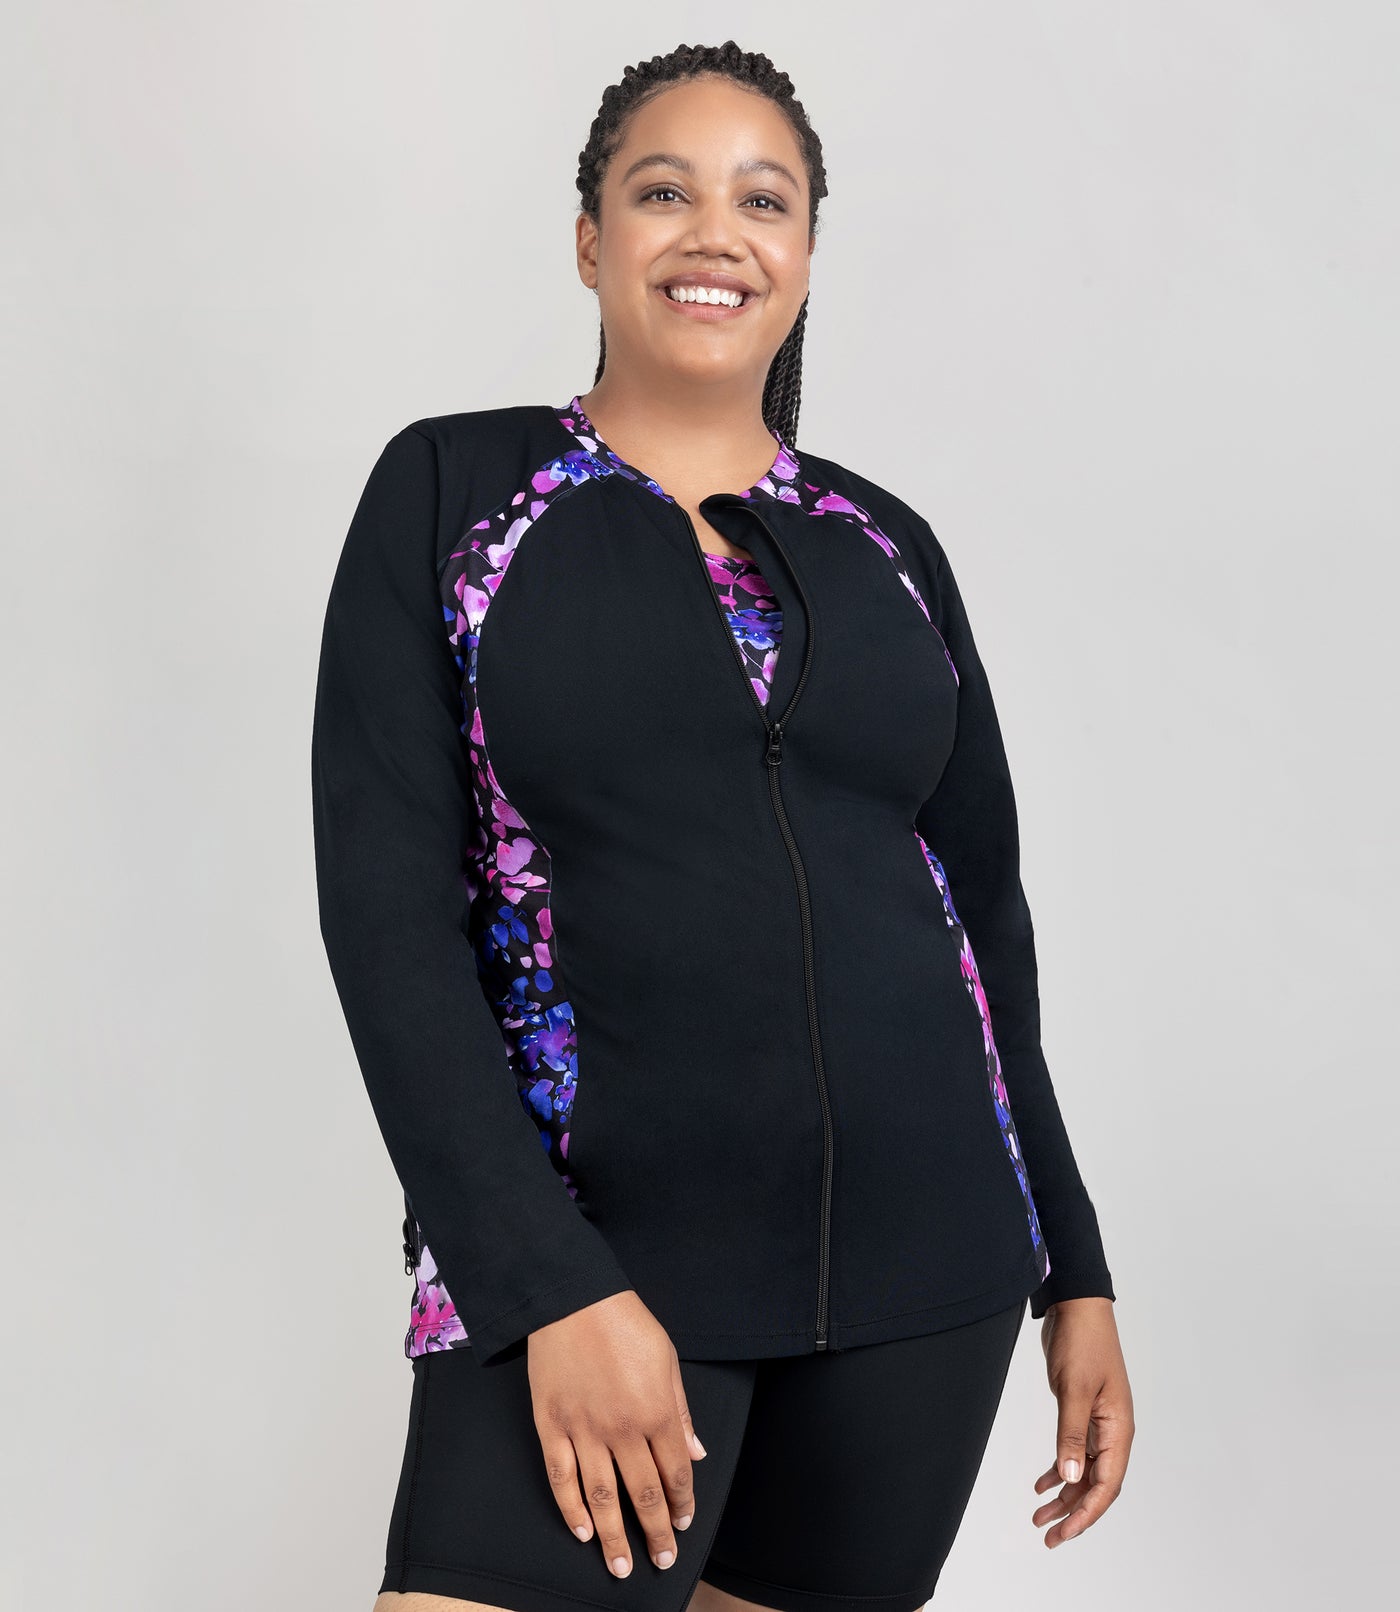 JunoActive model, facing front, wearing Aquasport Long Sleeve Zip Front Swim Jacket in solid black with  blue and pink floral elegance print accents.